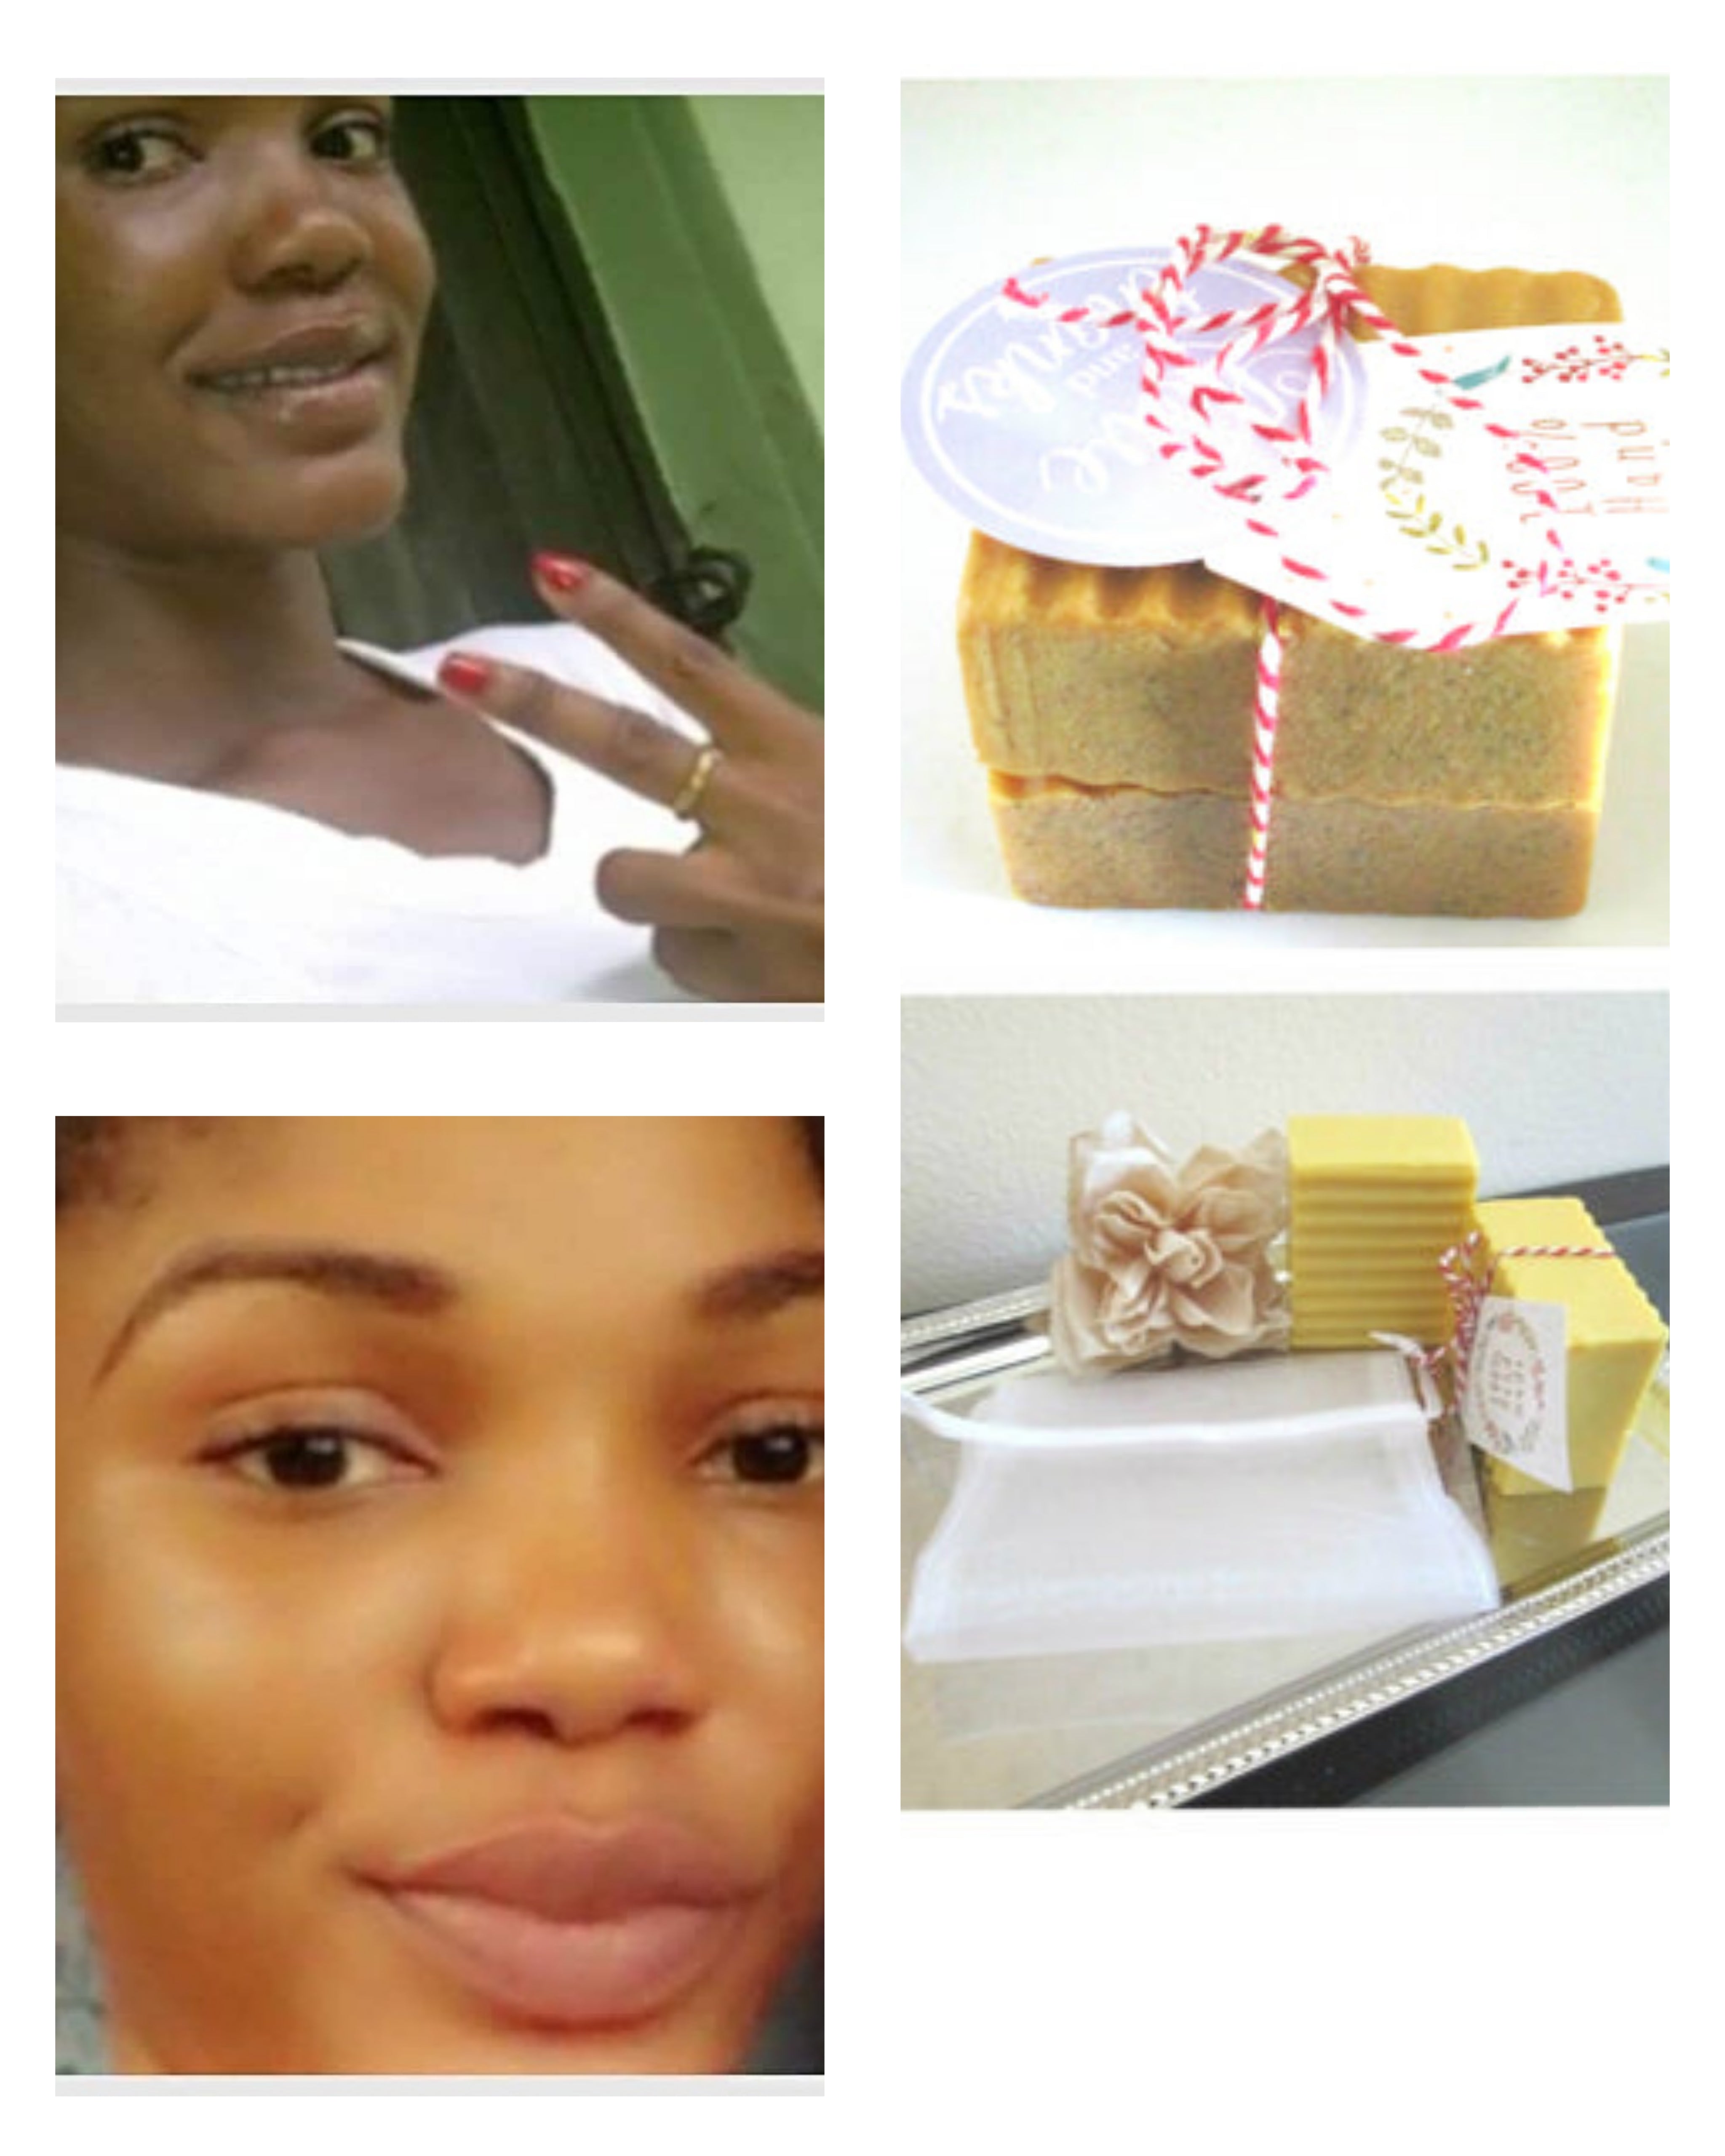 Cake Soap Documentary, Skin Bleaching in Jamaica... The Moral of The Story  Part 5 - YouTube